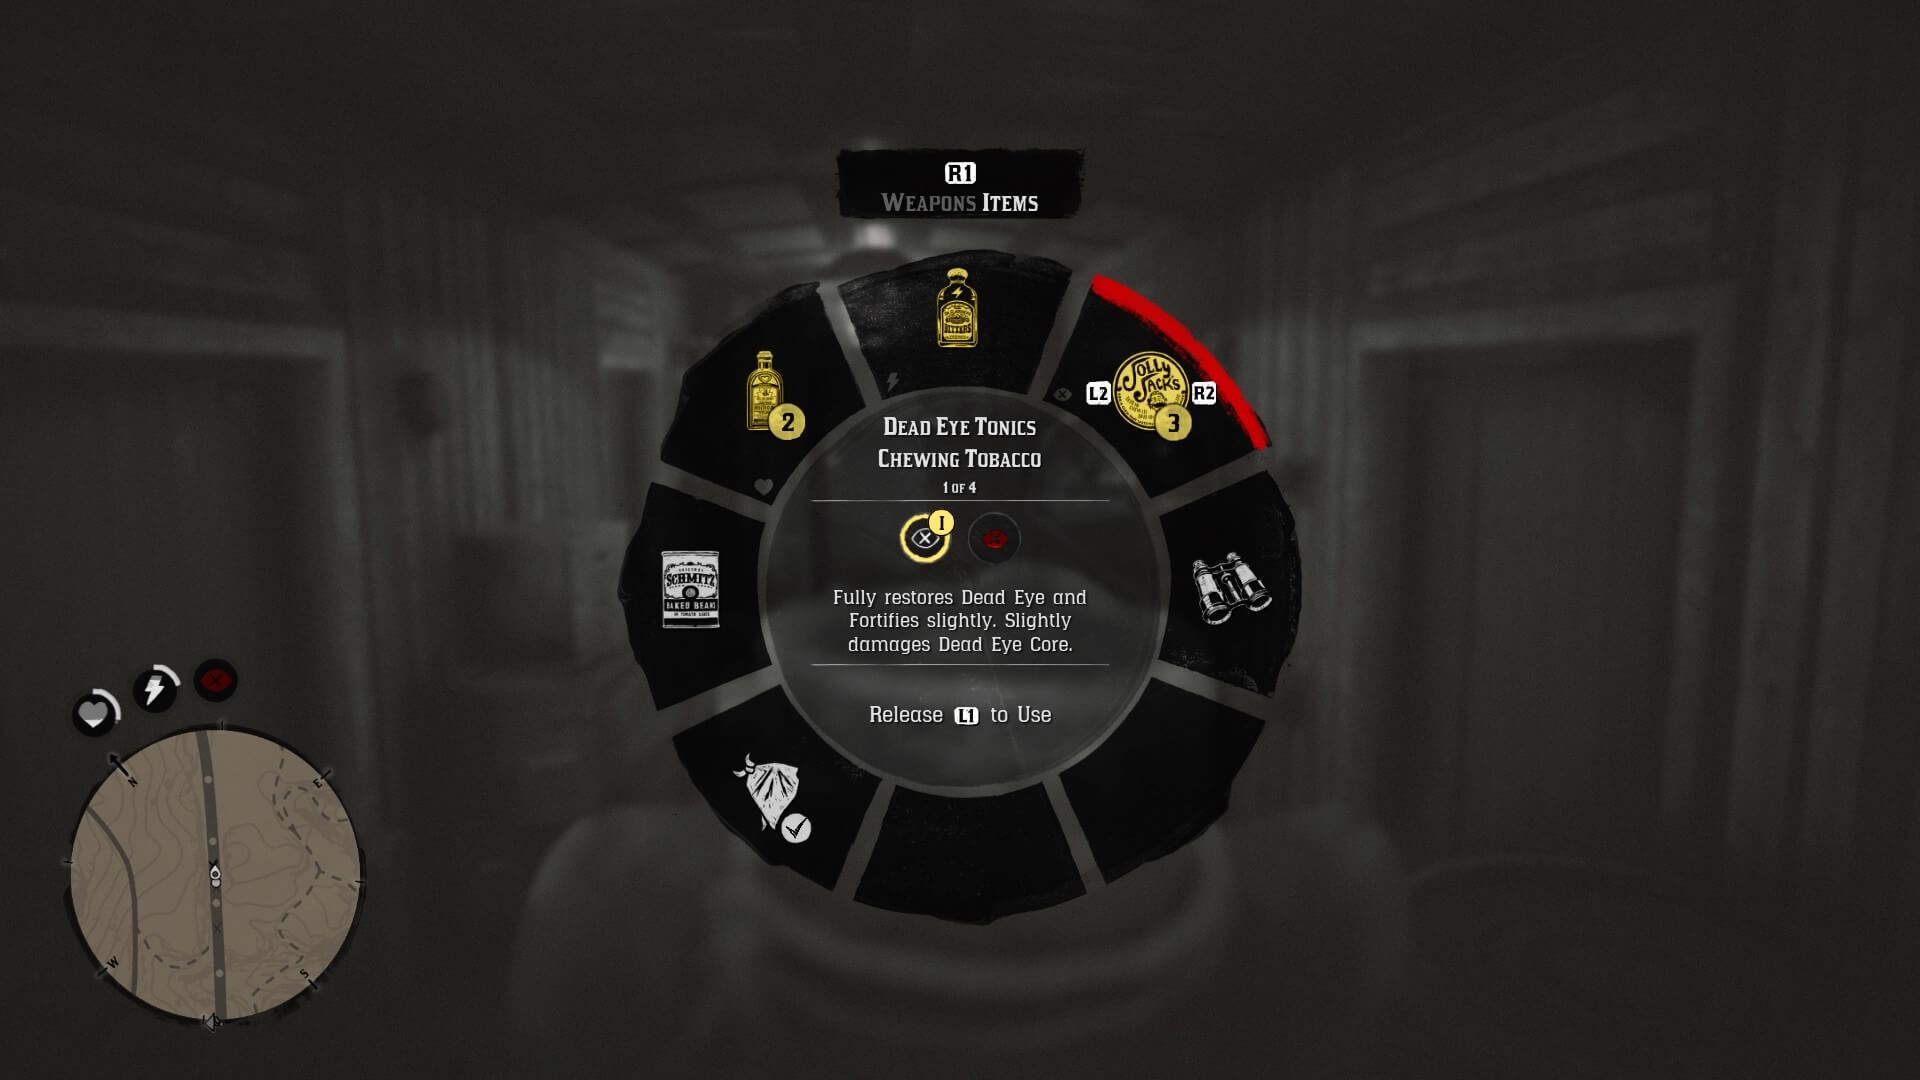 Ability Wheel screenshot of Red Dead Redemption 2 video game interface.